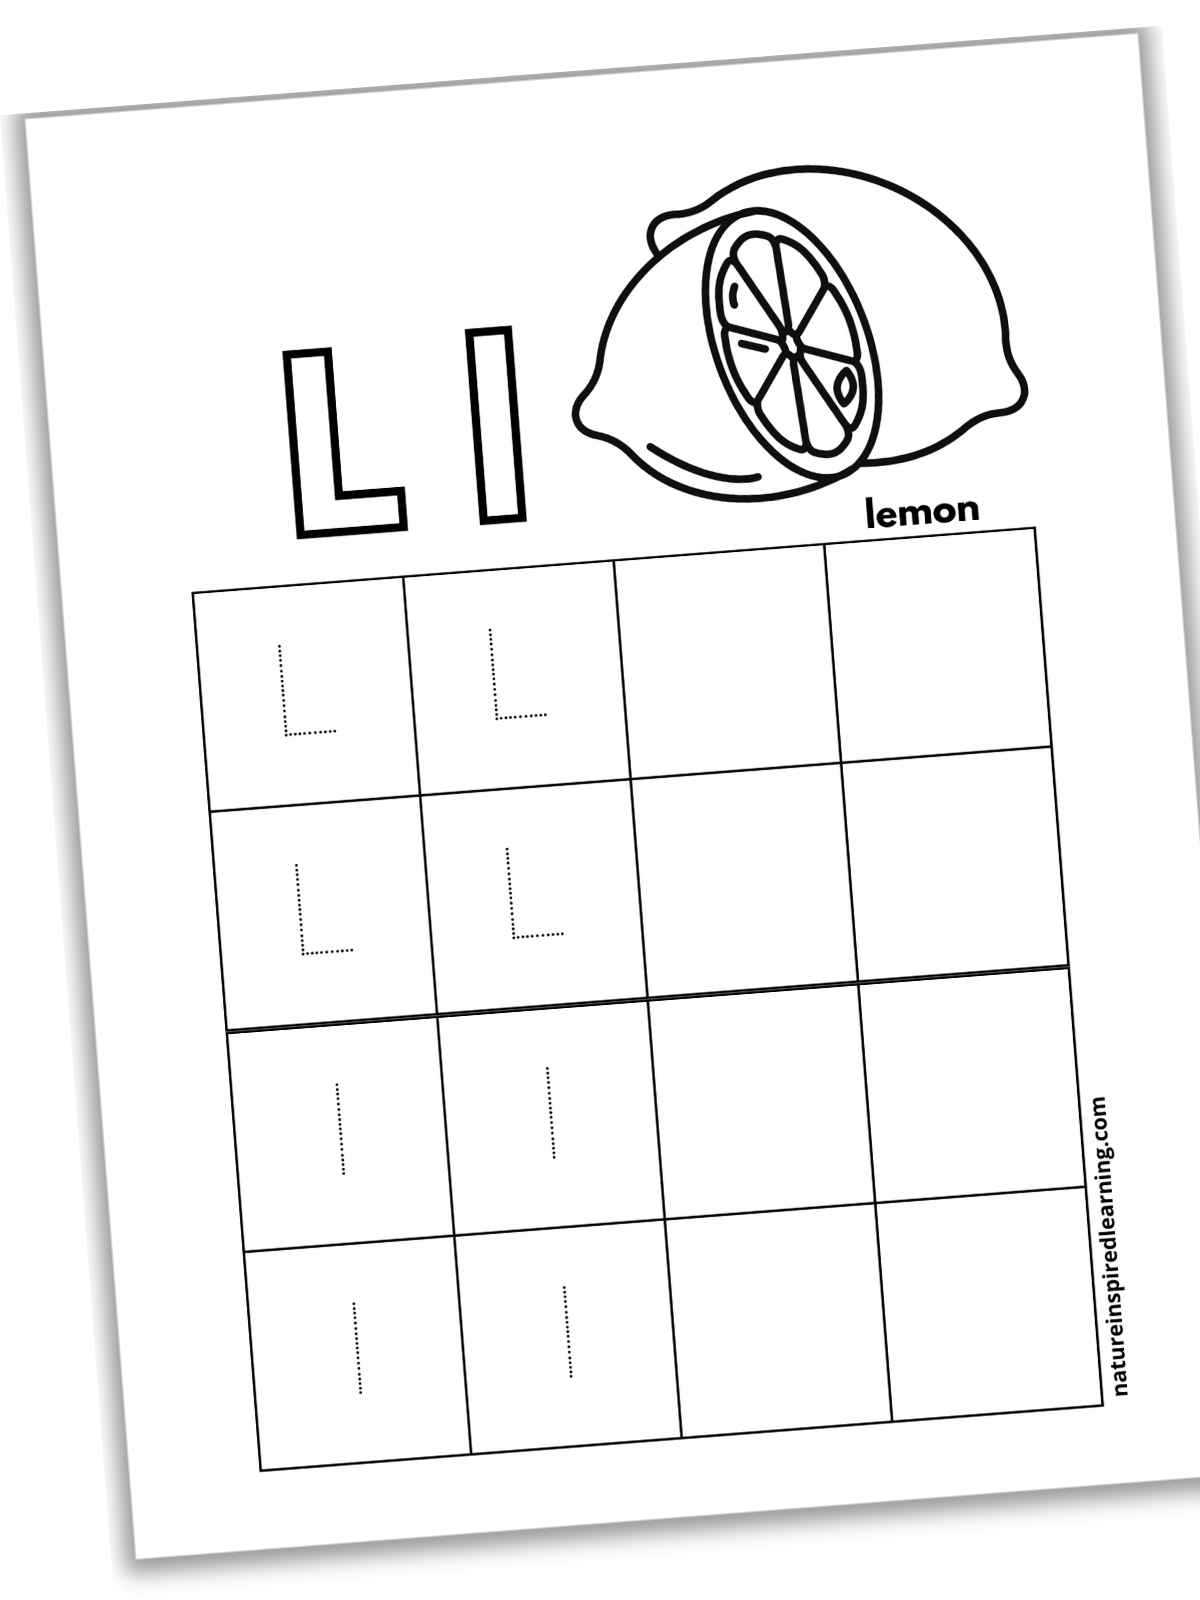 Worksheet with L l in outline form on top with a black and white lemon and half a lemon. Grid on sheet with four dotted L's and four dotted l's and eight blank boxes